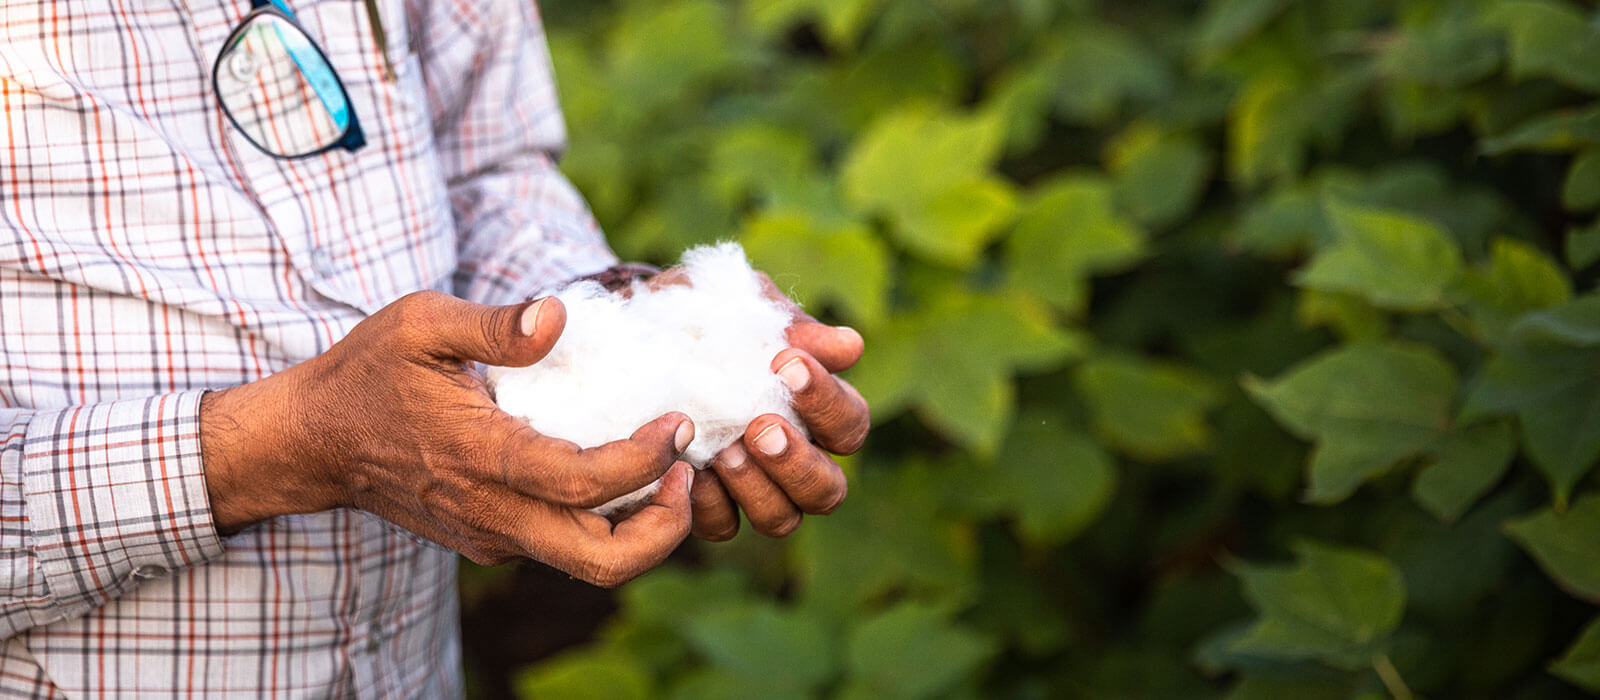 Sustainability Hero Mobile image. Farmer holding cotton in hands. Desktop image